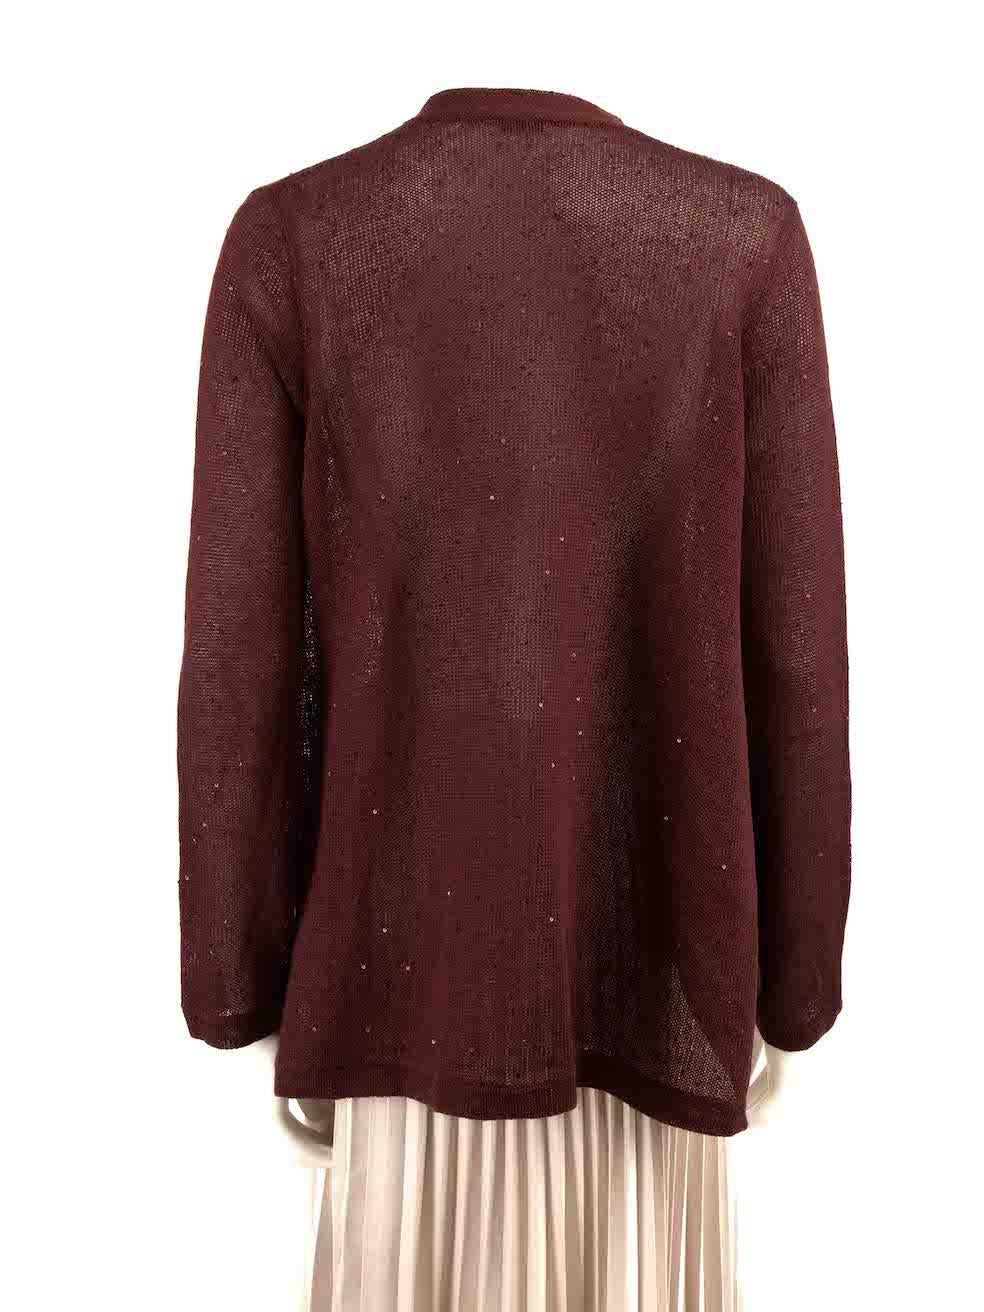 Brunello Cucinelli Burgundy Sequin Knit Cardigan Size S In Good Condition For Sale In London, GB